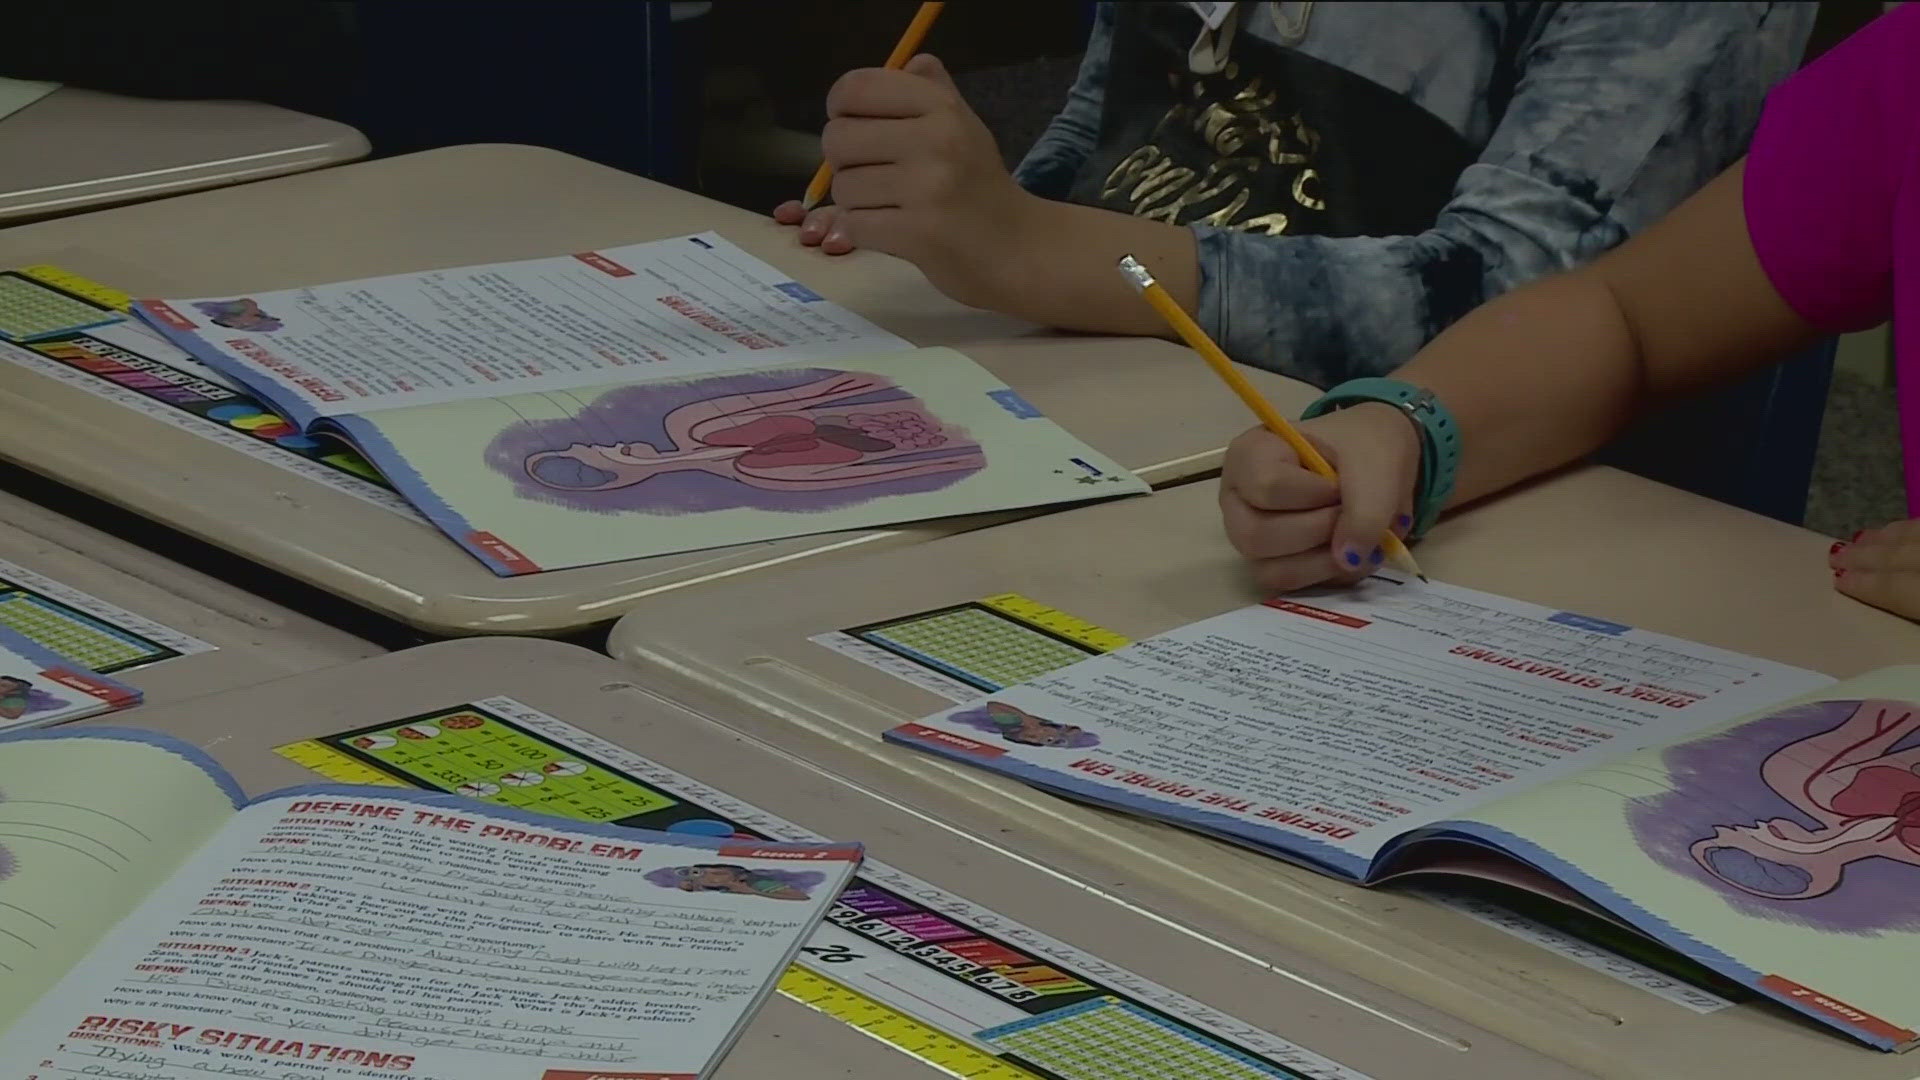 A growing initiative to teach high school students financial literacy is gaining momentum across the state.